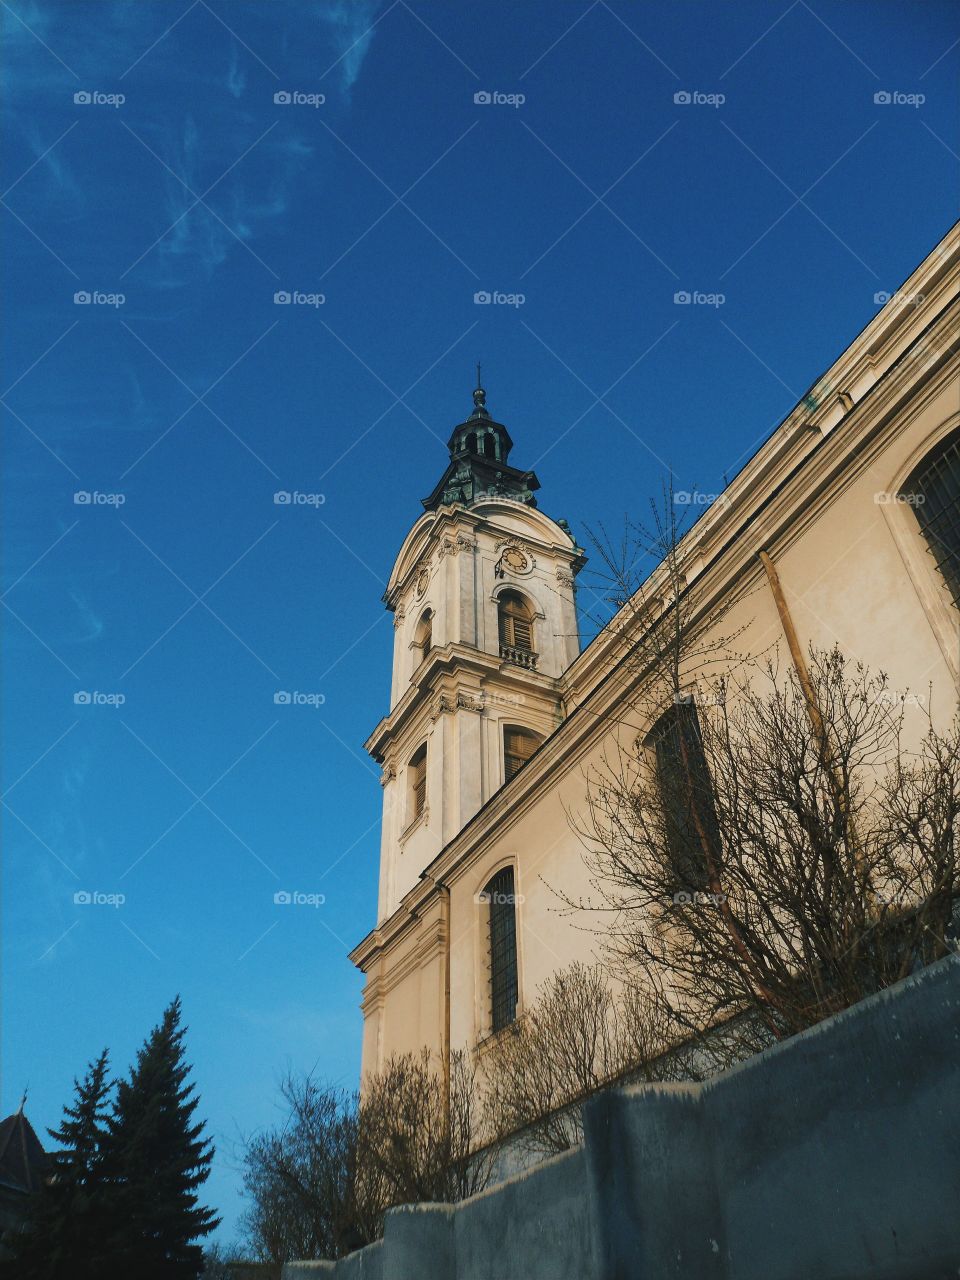 Architecture and buildings of the city of Lviv